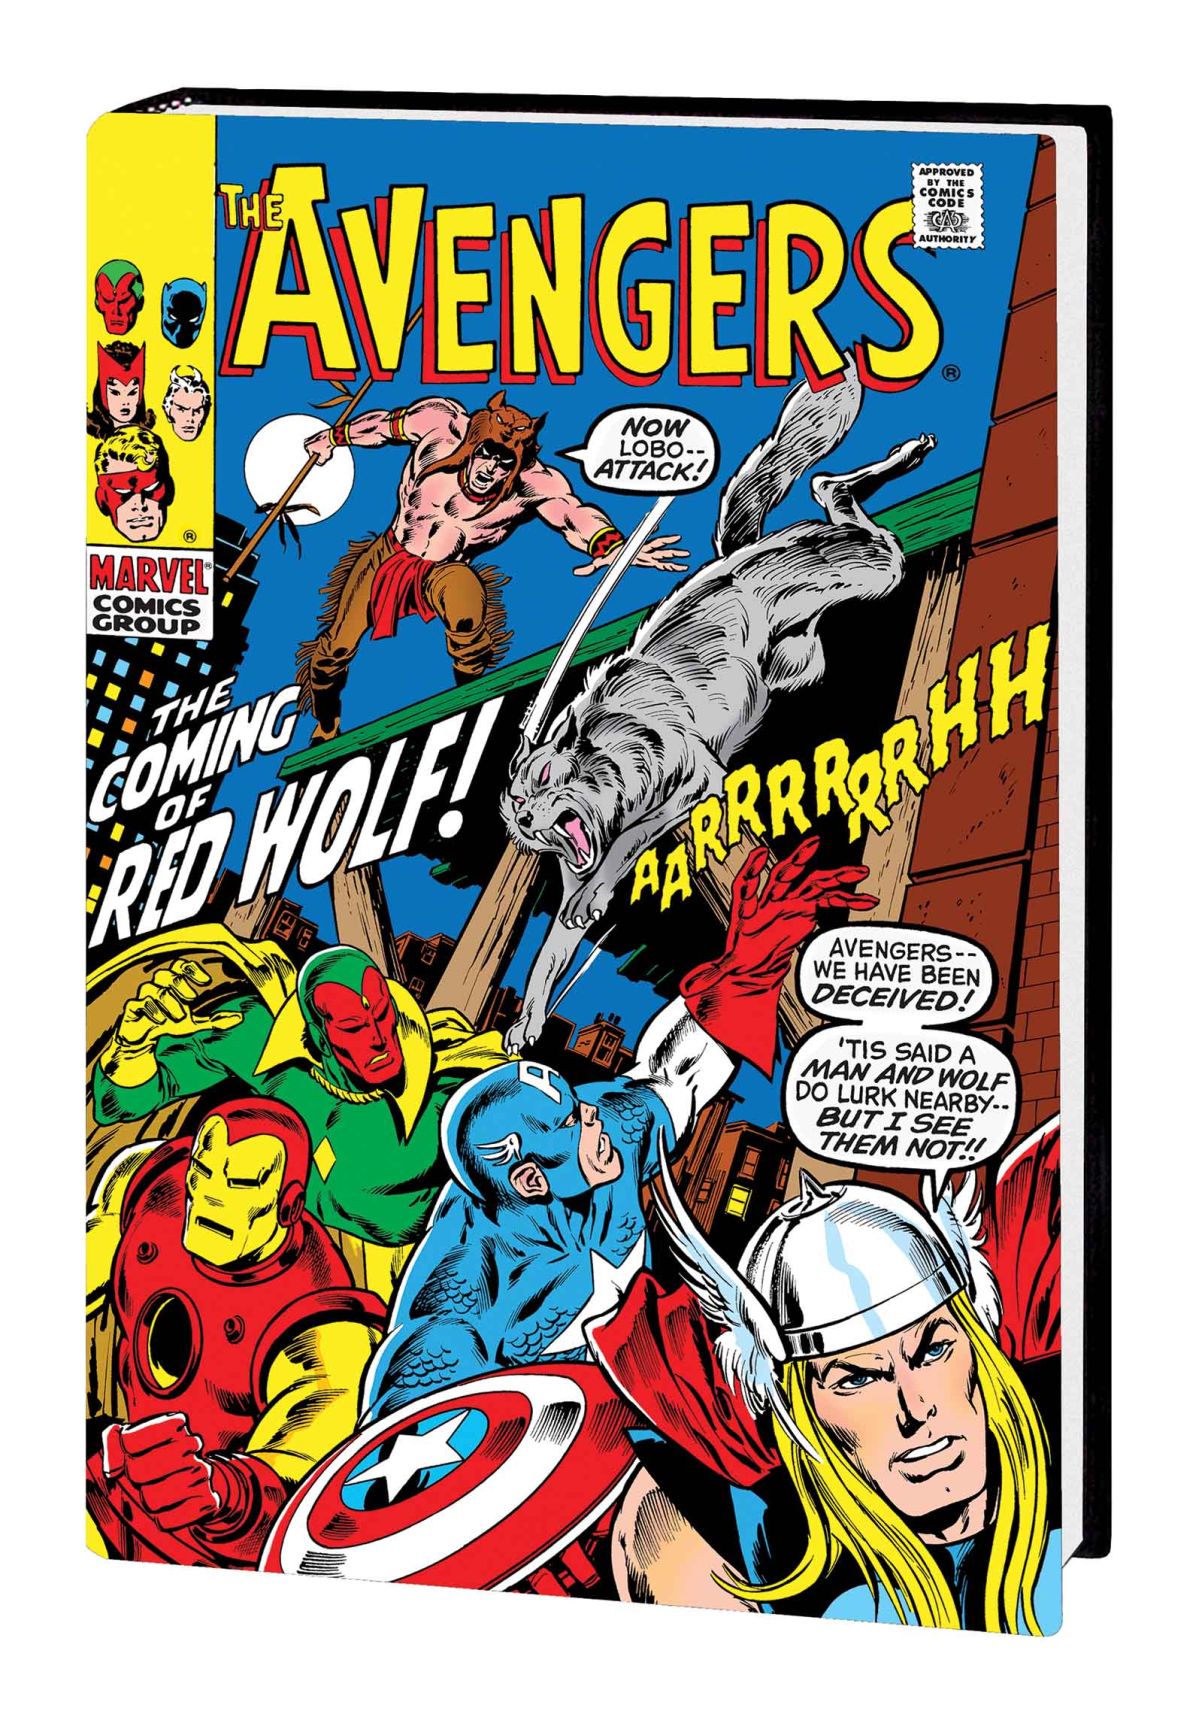 THE AVENGERS OMNIBUS VOL. 3 HC VARIANT BUSCEMA COVER